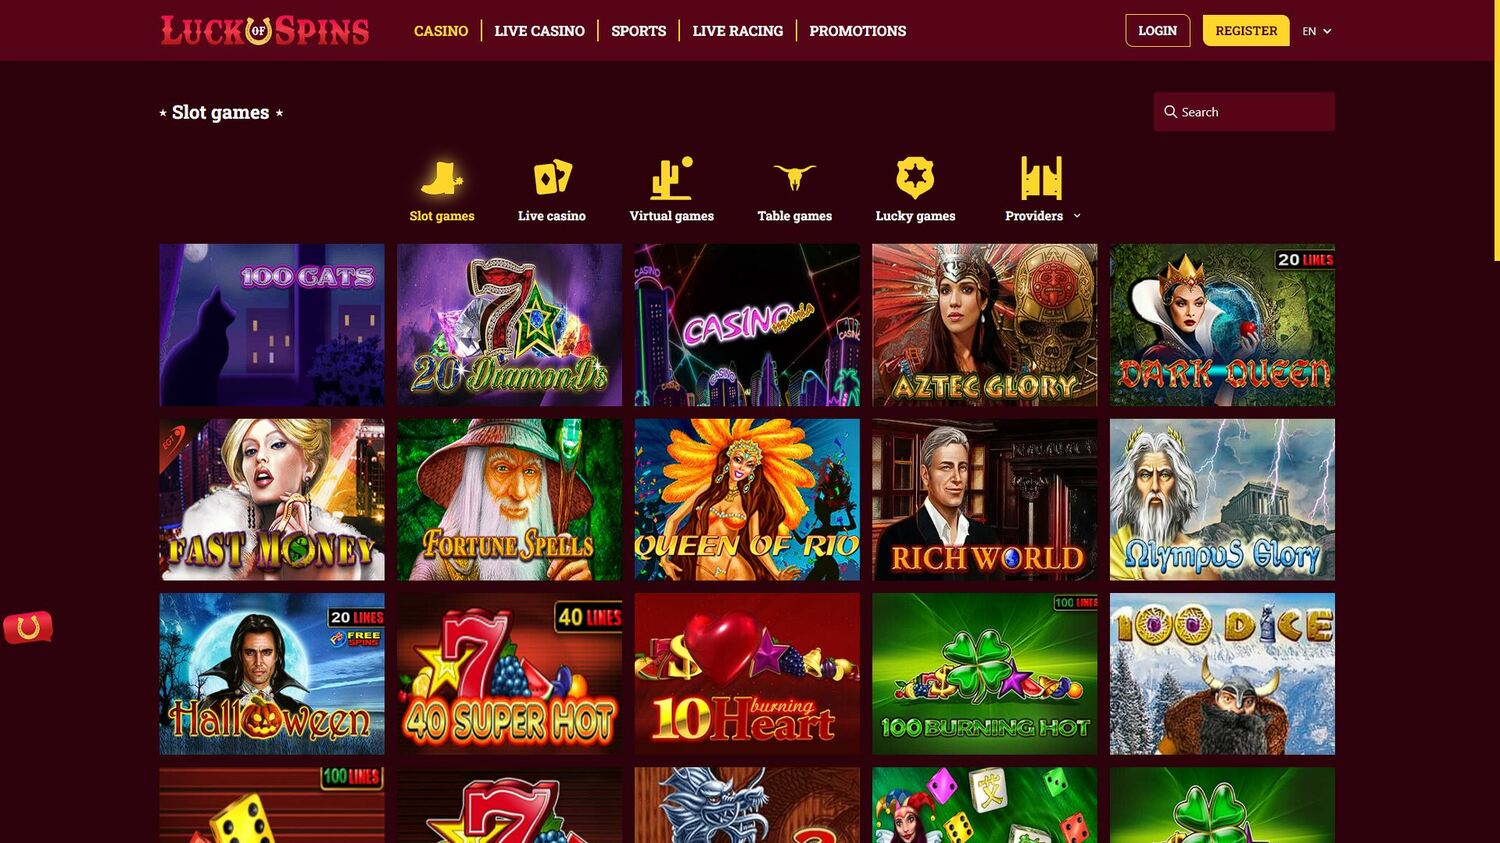 Luck Of Spins Casino Review